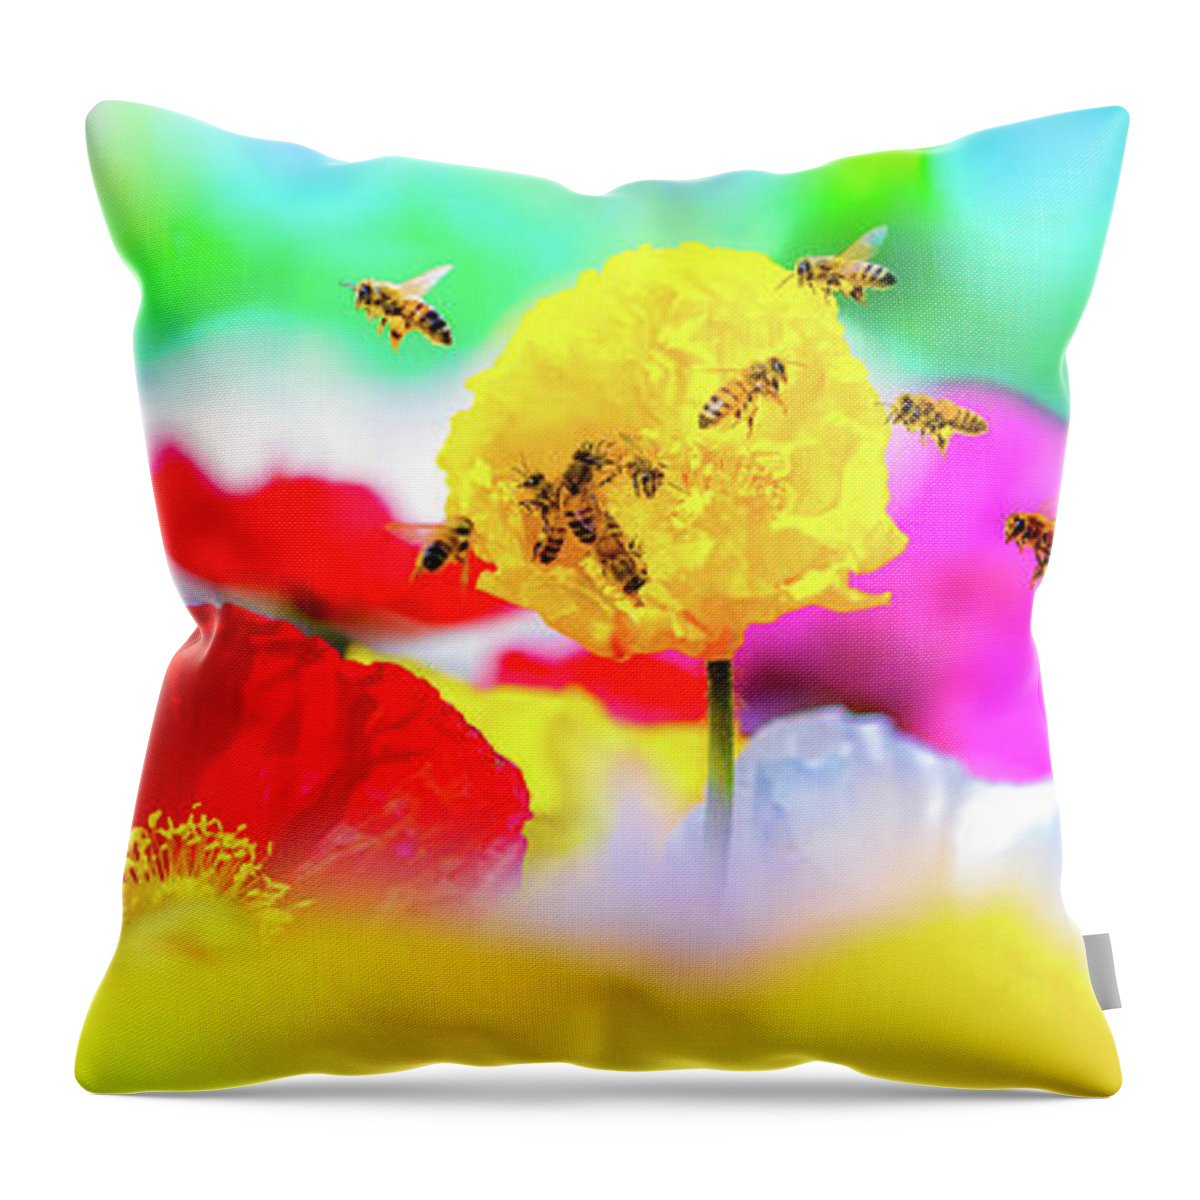 Busy Bees Throw Pillow featuring the photograph Busy Bees by Az Jackson